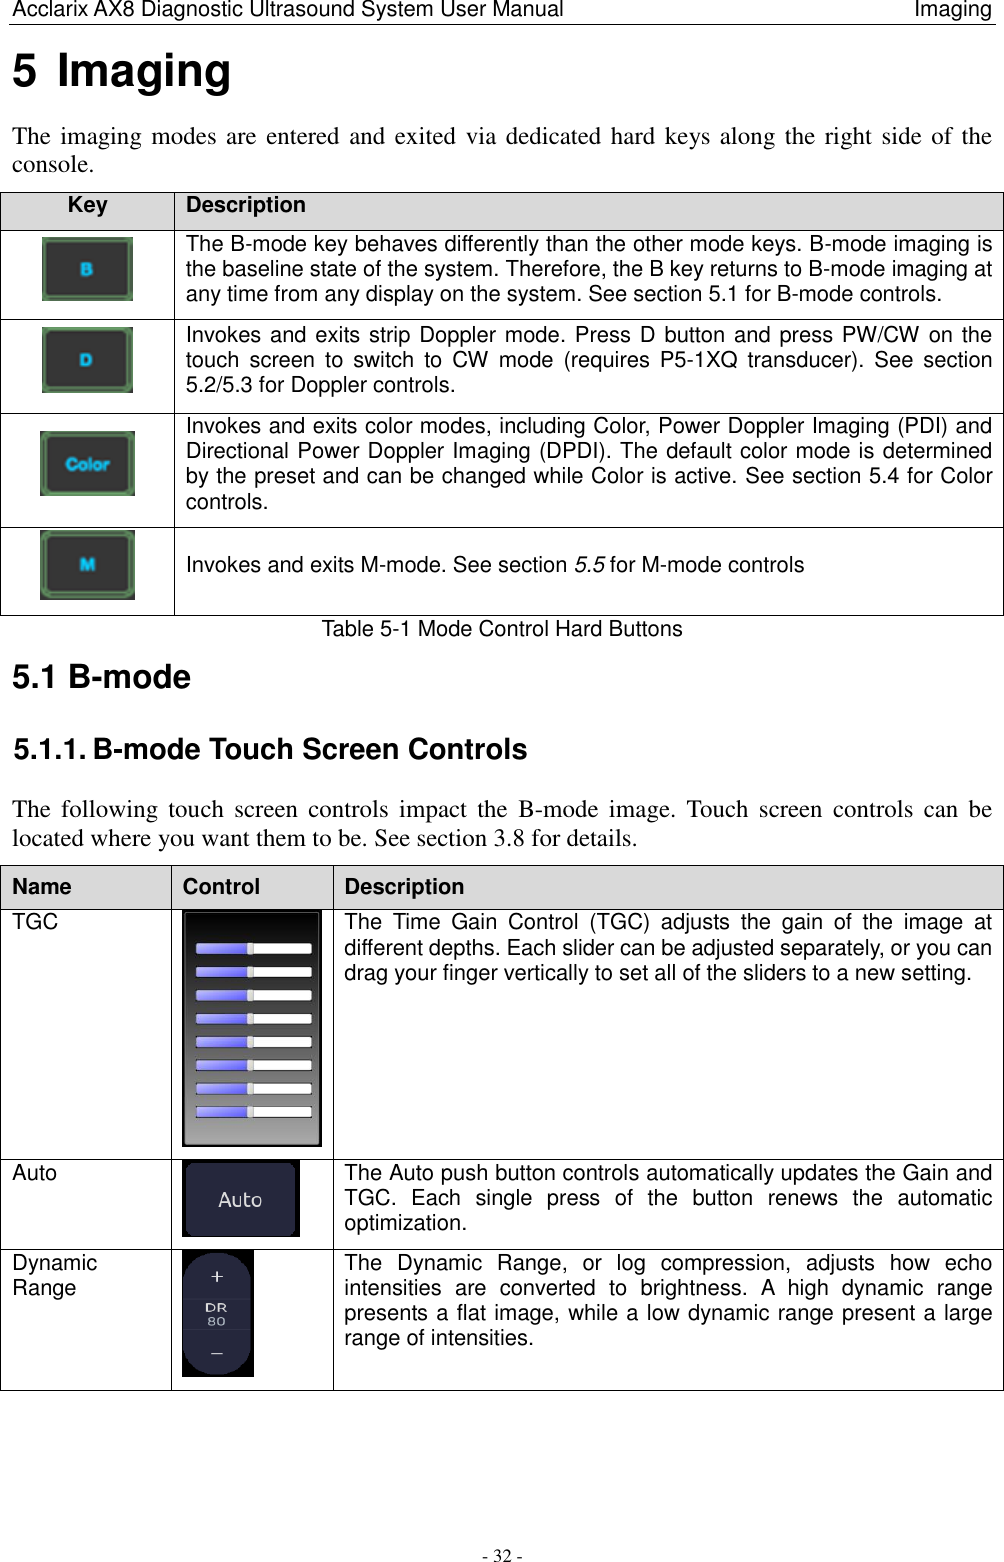 Acclarix AX8 Diagnostic Ultrasound System User Manual                                                                Imaging - 32 - 5 Imaging The imaging modes are entered and exited via dedicated hard keys along the right side of the console.   Key Description  The B-mode key behaves differently than the other mode keys. B-mode imaging is the baseline state of the system. Therefore, the B key returns to B-mode imaging at any time from any display on the system. See section 5.1 for B-mode controls.  Invokes and exits strip Doppler mode. Press D button and press PW/CW on the touch  screen  to  switch  to  CW  mode  (requires  P5-1XQ  transducer).  See  section 5.2/5.3 for Doppler controls.  Invokes and exits color modes, including Color, Power Doppler Imaging (PDI) and Directional Power Doppler Imaging (DPDI). The default color mode is determined by the preset and can be changed while Color is active. See section 5.4 for Color controls.  Invokes and exits M-mode. See section 5.5 for M-mode controls Table 5-1 Mode Control Hard Buttons 5.1 B-mode 5.1.1. B-mode Touch Screen Controls The  following touch  screen  controls  impact  the  B-mode  image.  Touch  screen  controls  can  be located where you want them to be. See section 3.8 for details. Name Control Description TGC  The  Time  Gain  Control  (TGC)  adjusts  the  gain  of  the  image  at different depths. Each slider can be adjusted separately, or you can drag your finger vertically to set all of the sliders to a new setting.    Auto  The Auto push button controls automatically updates the Gain and TGC.  Each  single  press  of  the  button  renews  the  automatic optimization.   Dynamic Range  The  Dynamic  Range,  or  log  compression,  adjusts  how  echo intensities  are  converted  to  brightness.  A  high  dynamic  range presents a flat image, while a low dynamic range present a large range of intensities.   